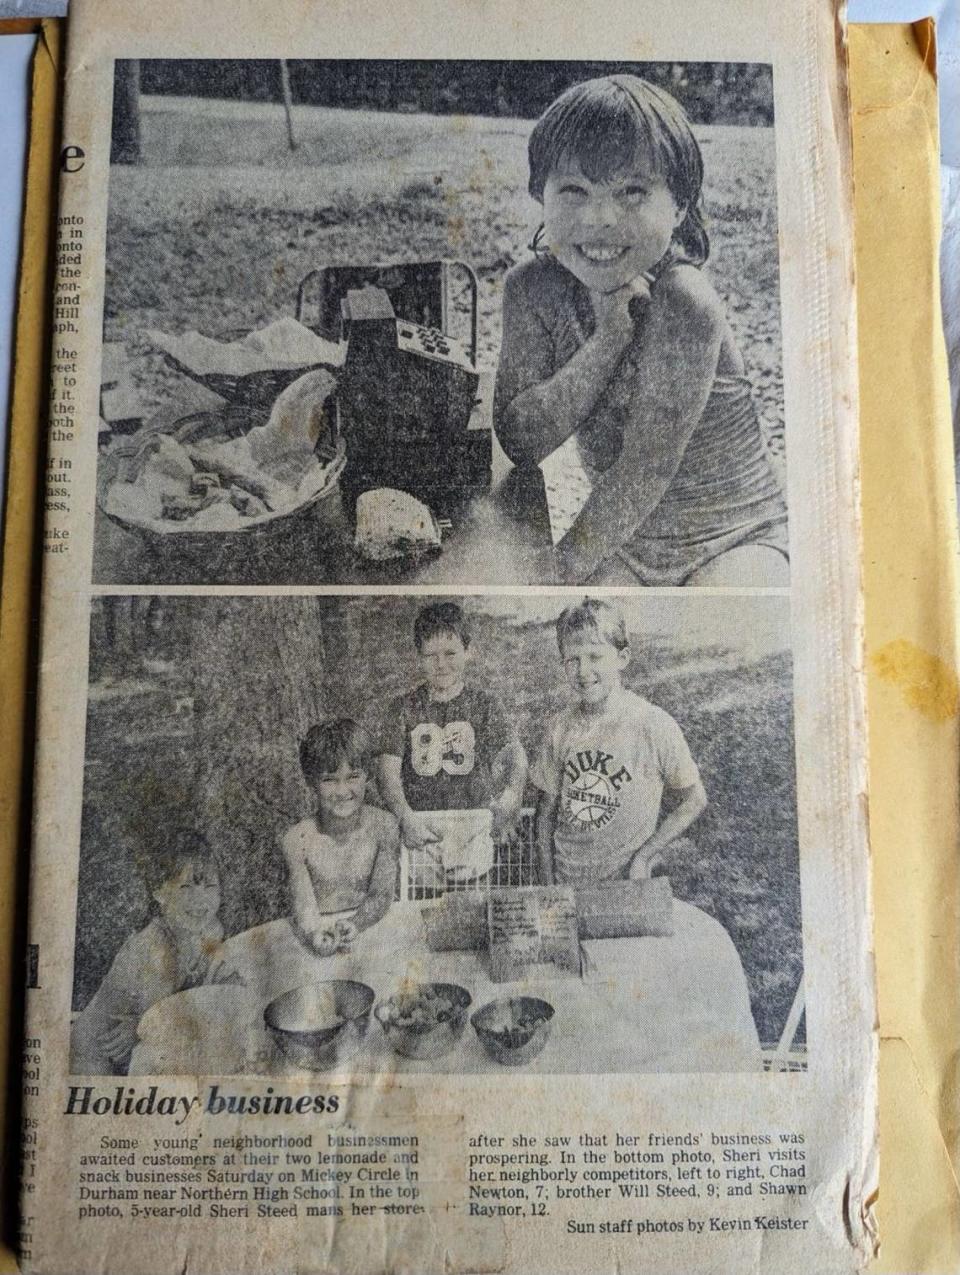 A newspaper clipping from the July 4, 1983 edition of The Durham Sun shows 5-year-old Sheri “Sharyn” Steed with her lemonade and snack business. The photo was taken by current N&O video producer Kevin Keister working in his first month as a photojournalist for the Bull City’s morning and afternoon papers. Forty years to the date this was published, the now 45-year-old Sharyn Horewitch received approval of her first patent.